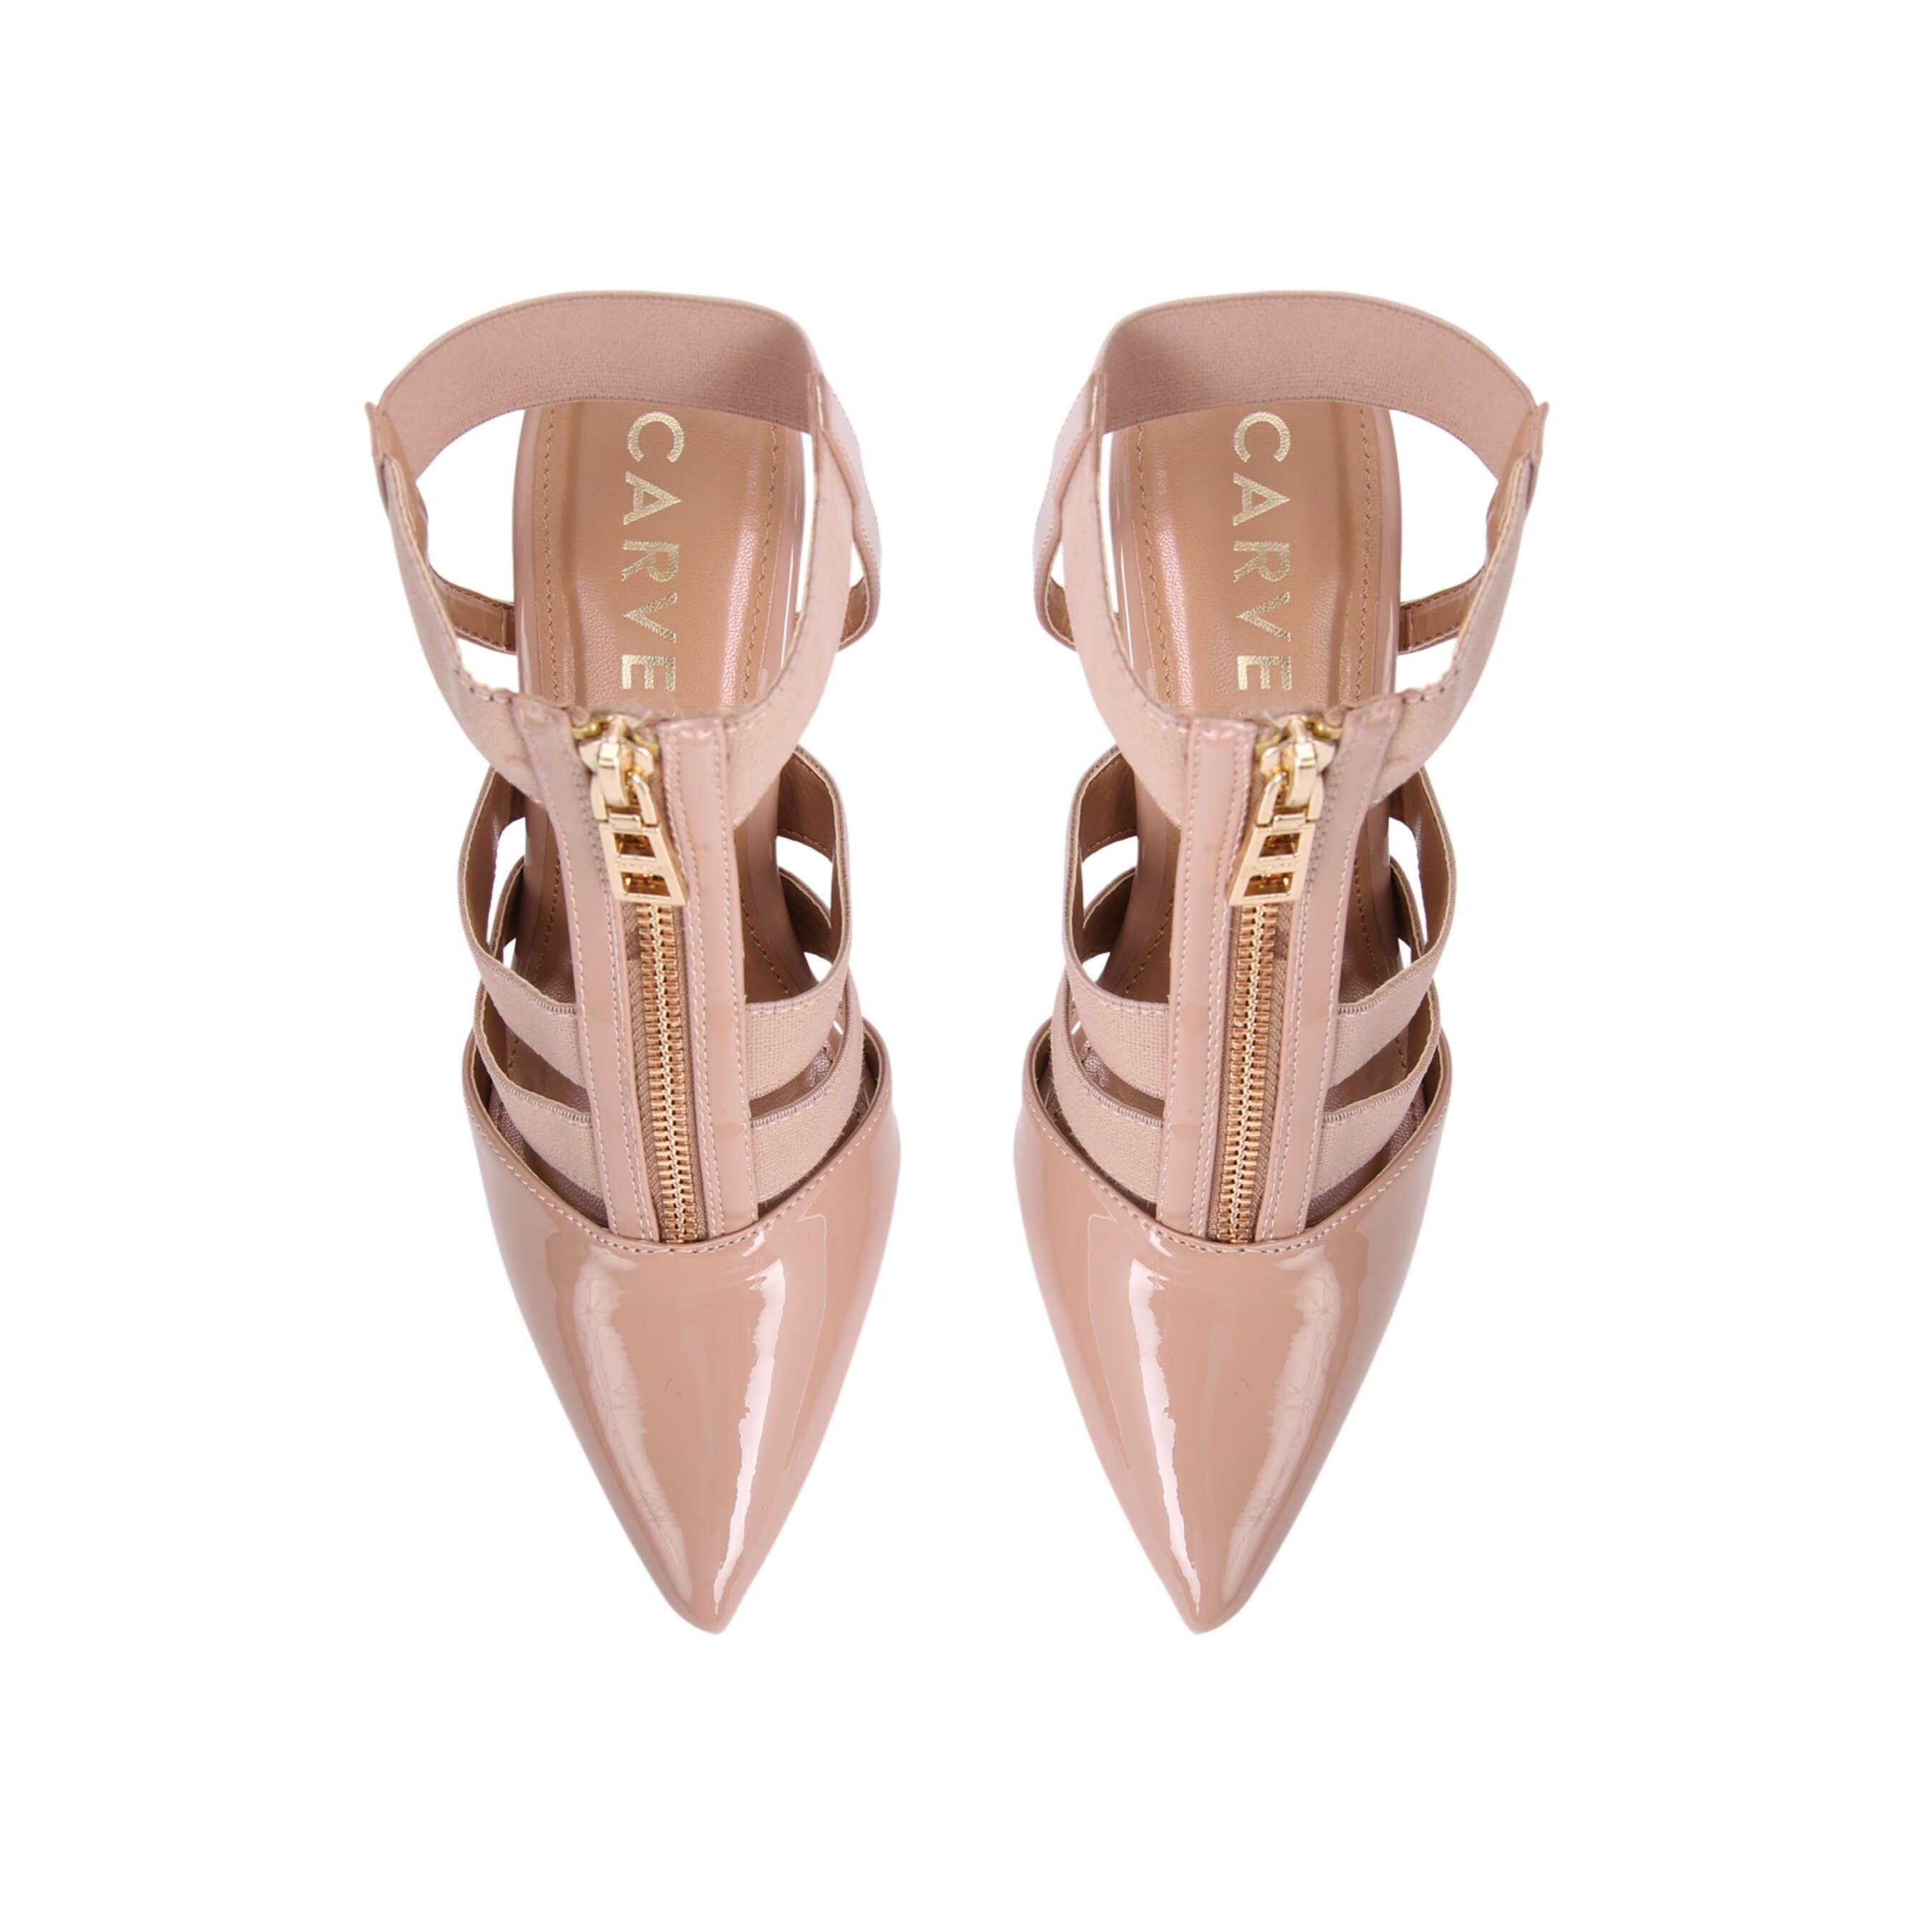 The Kunning Court heel features a caged upper in blush fabric with statement gold zip down the front. The toe is pointed with a stiletto heel. Heel height: 110mm.